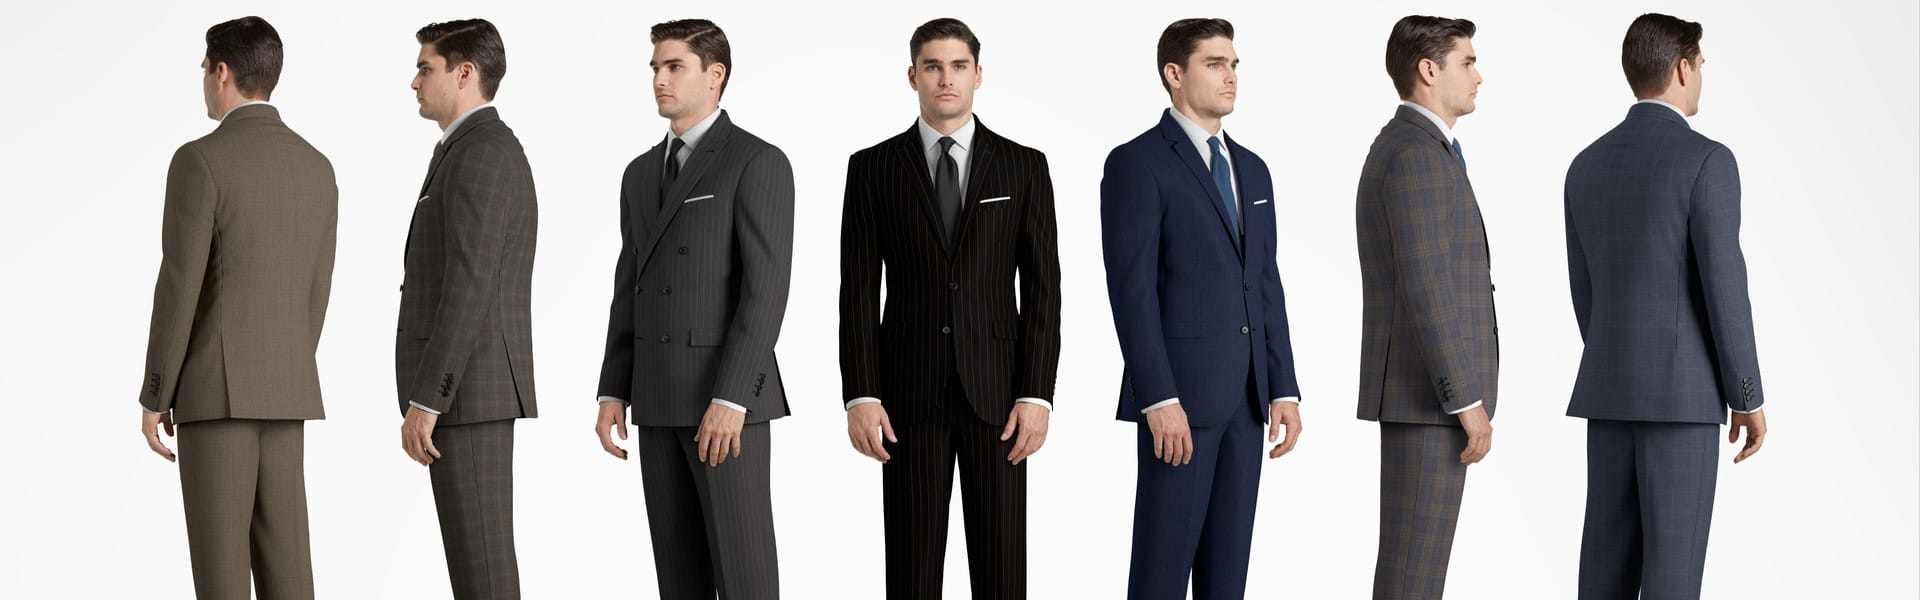 A series of images of a man wearing different suits from different angles